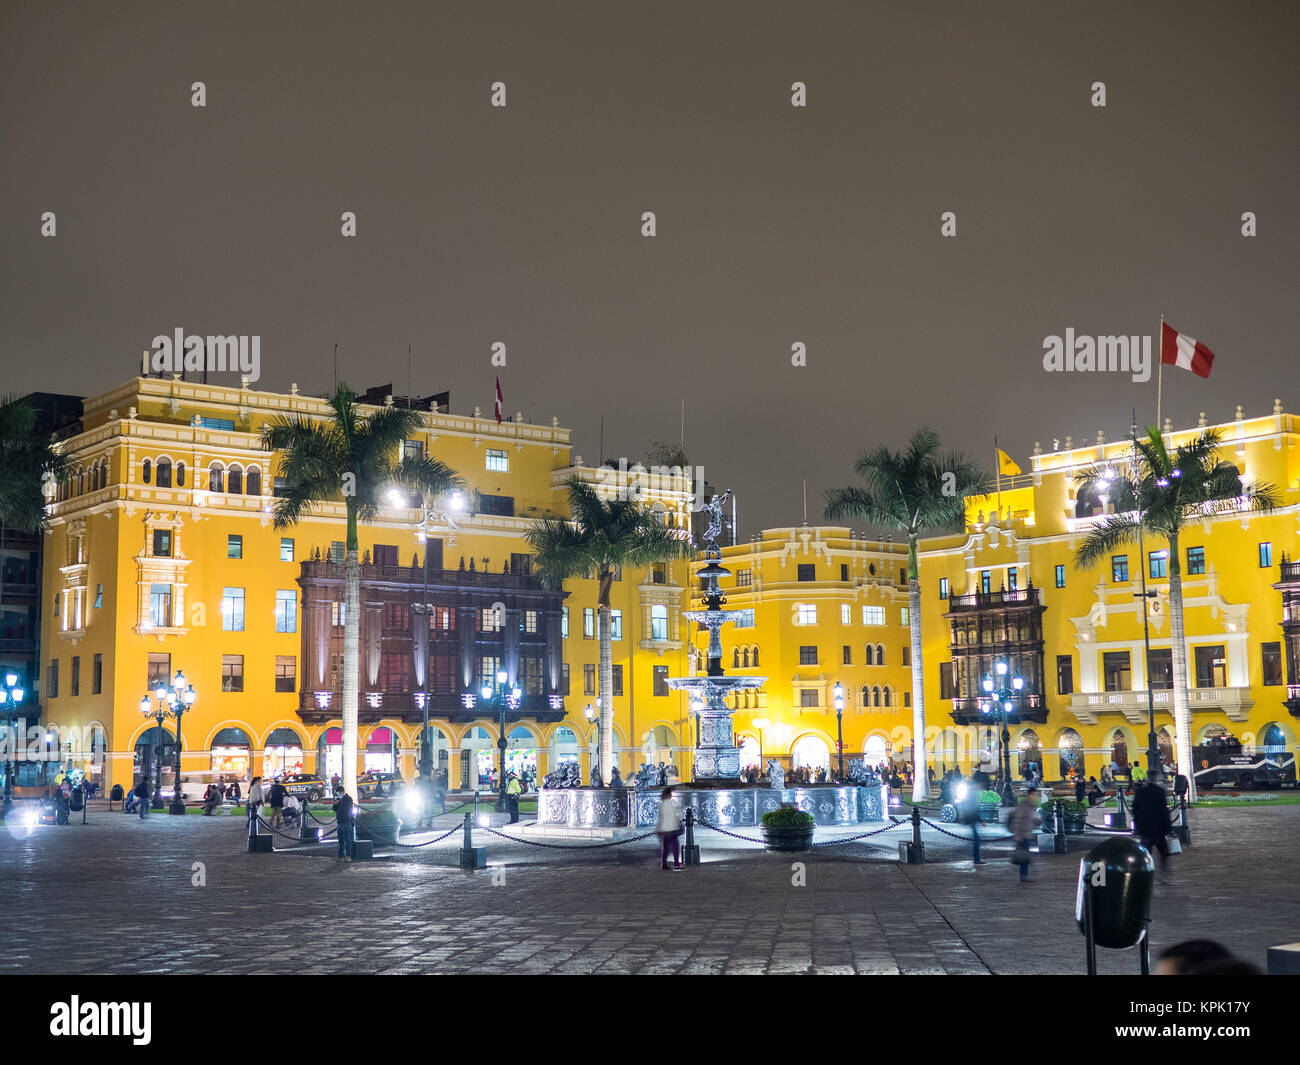 LIMA, PERU - SEPTEMBER 17, 2015. In Lima, in the Plaza de Armas (Main Square) the architecture remains as in the colonial era. Stock Photo